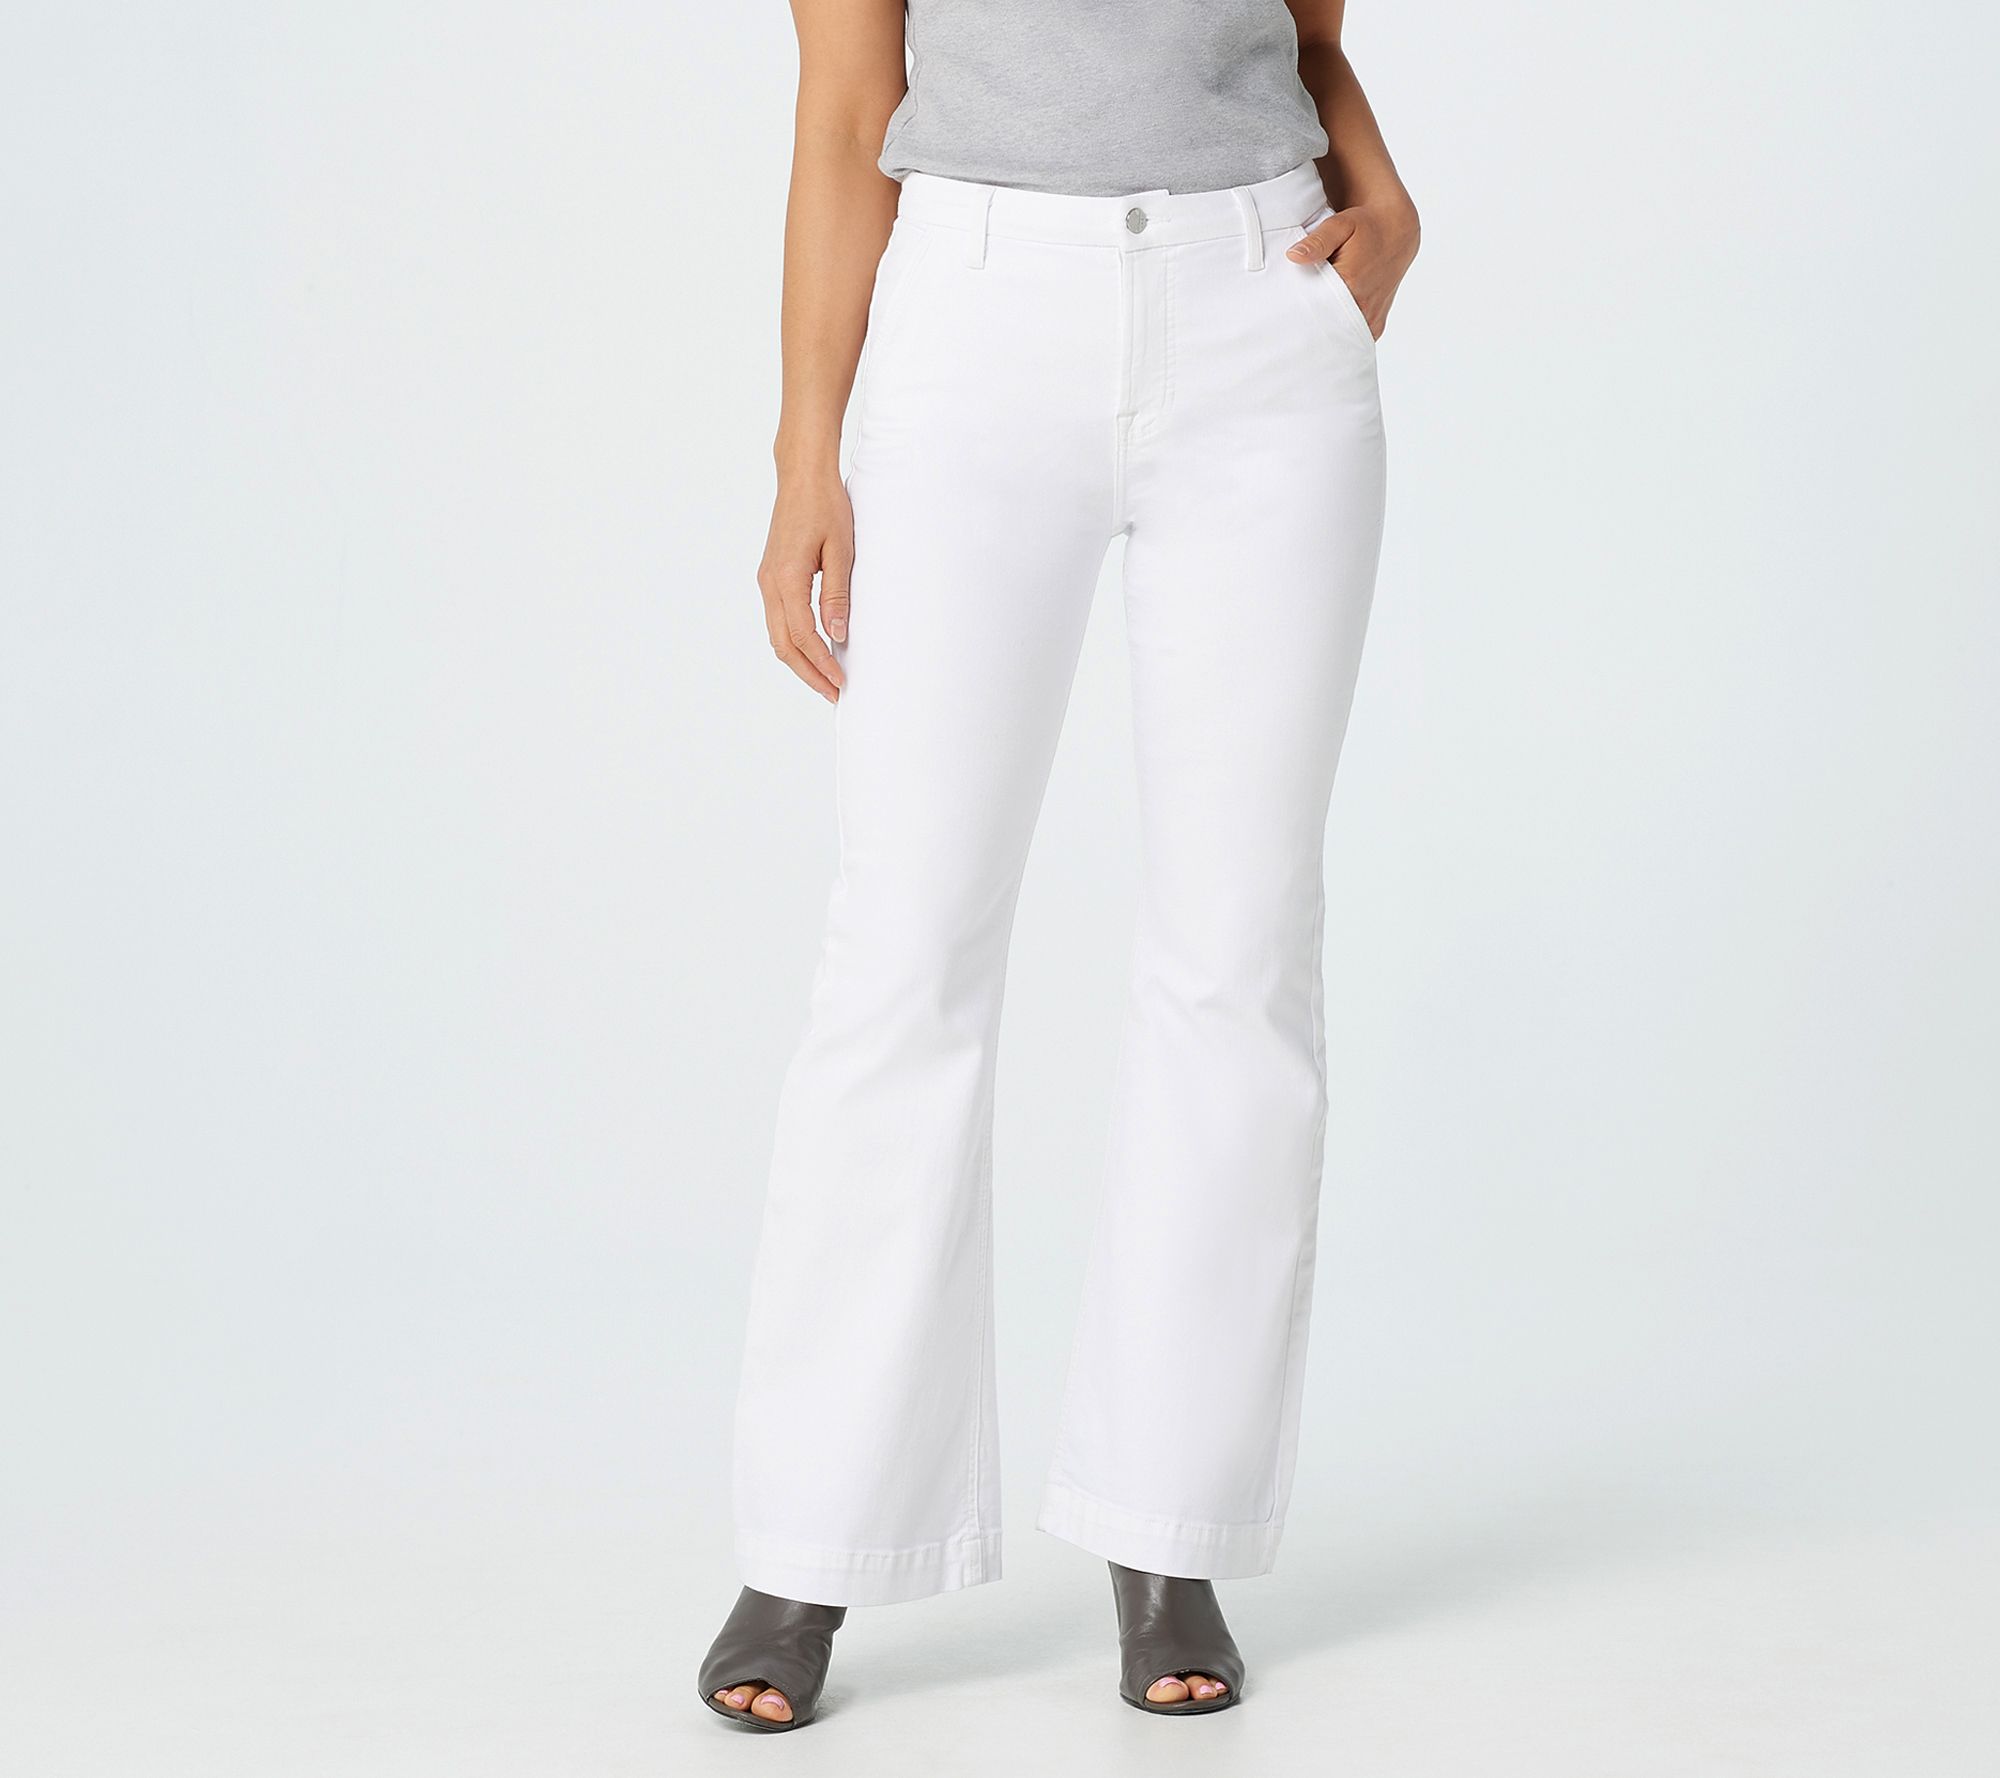 Jen7 by 7 for All Mankind Tailorless Trousers - White - QVC.com